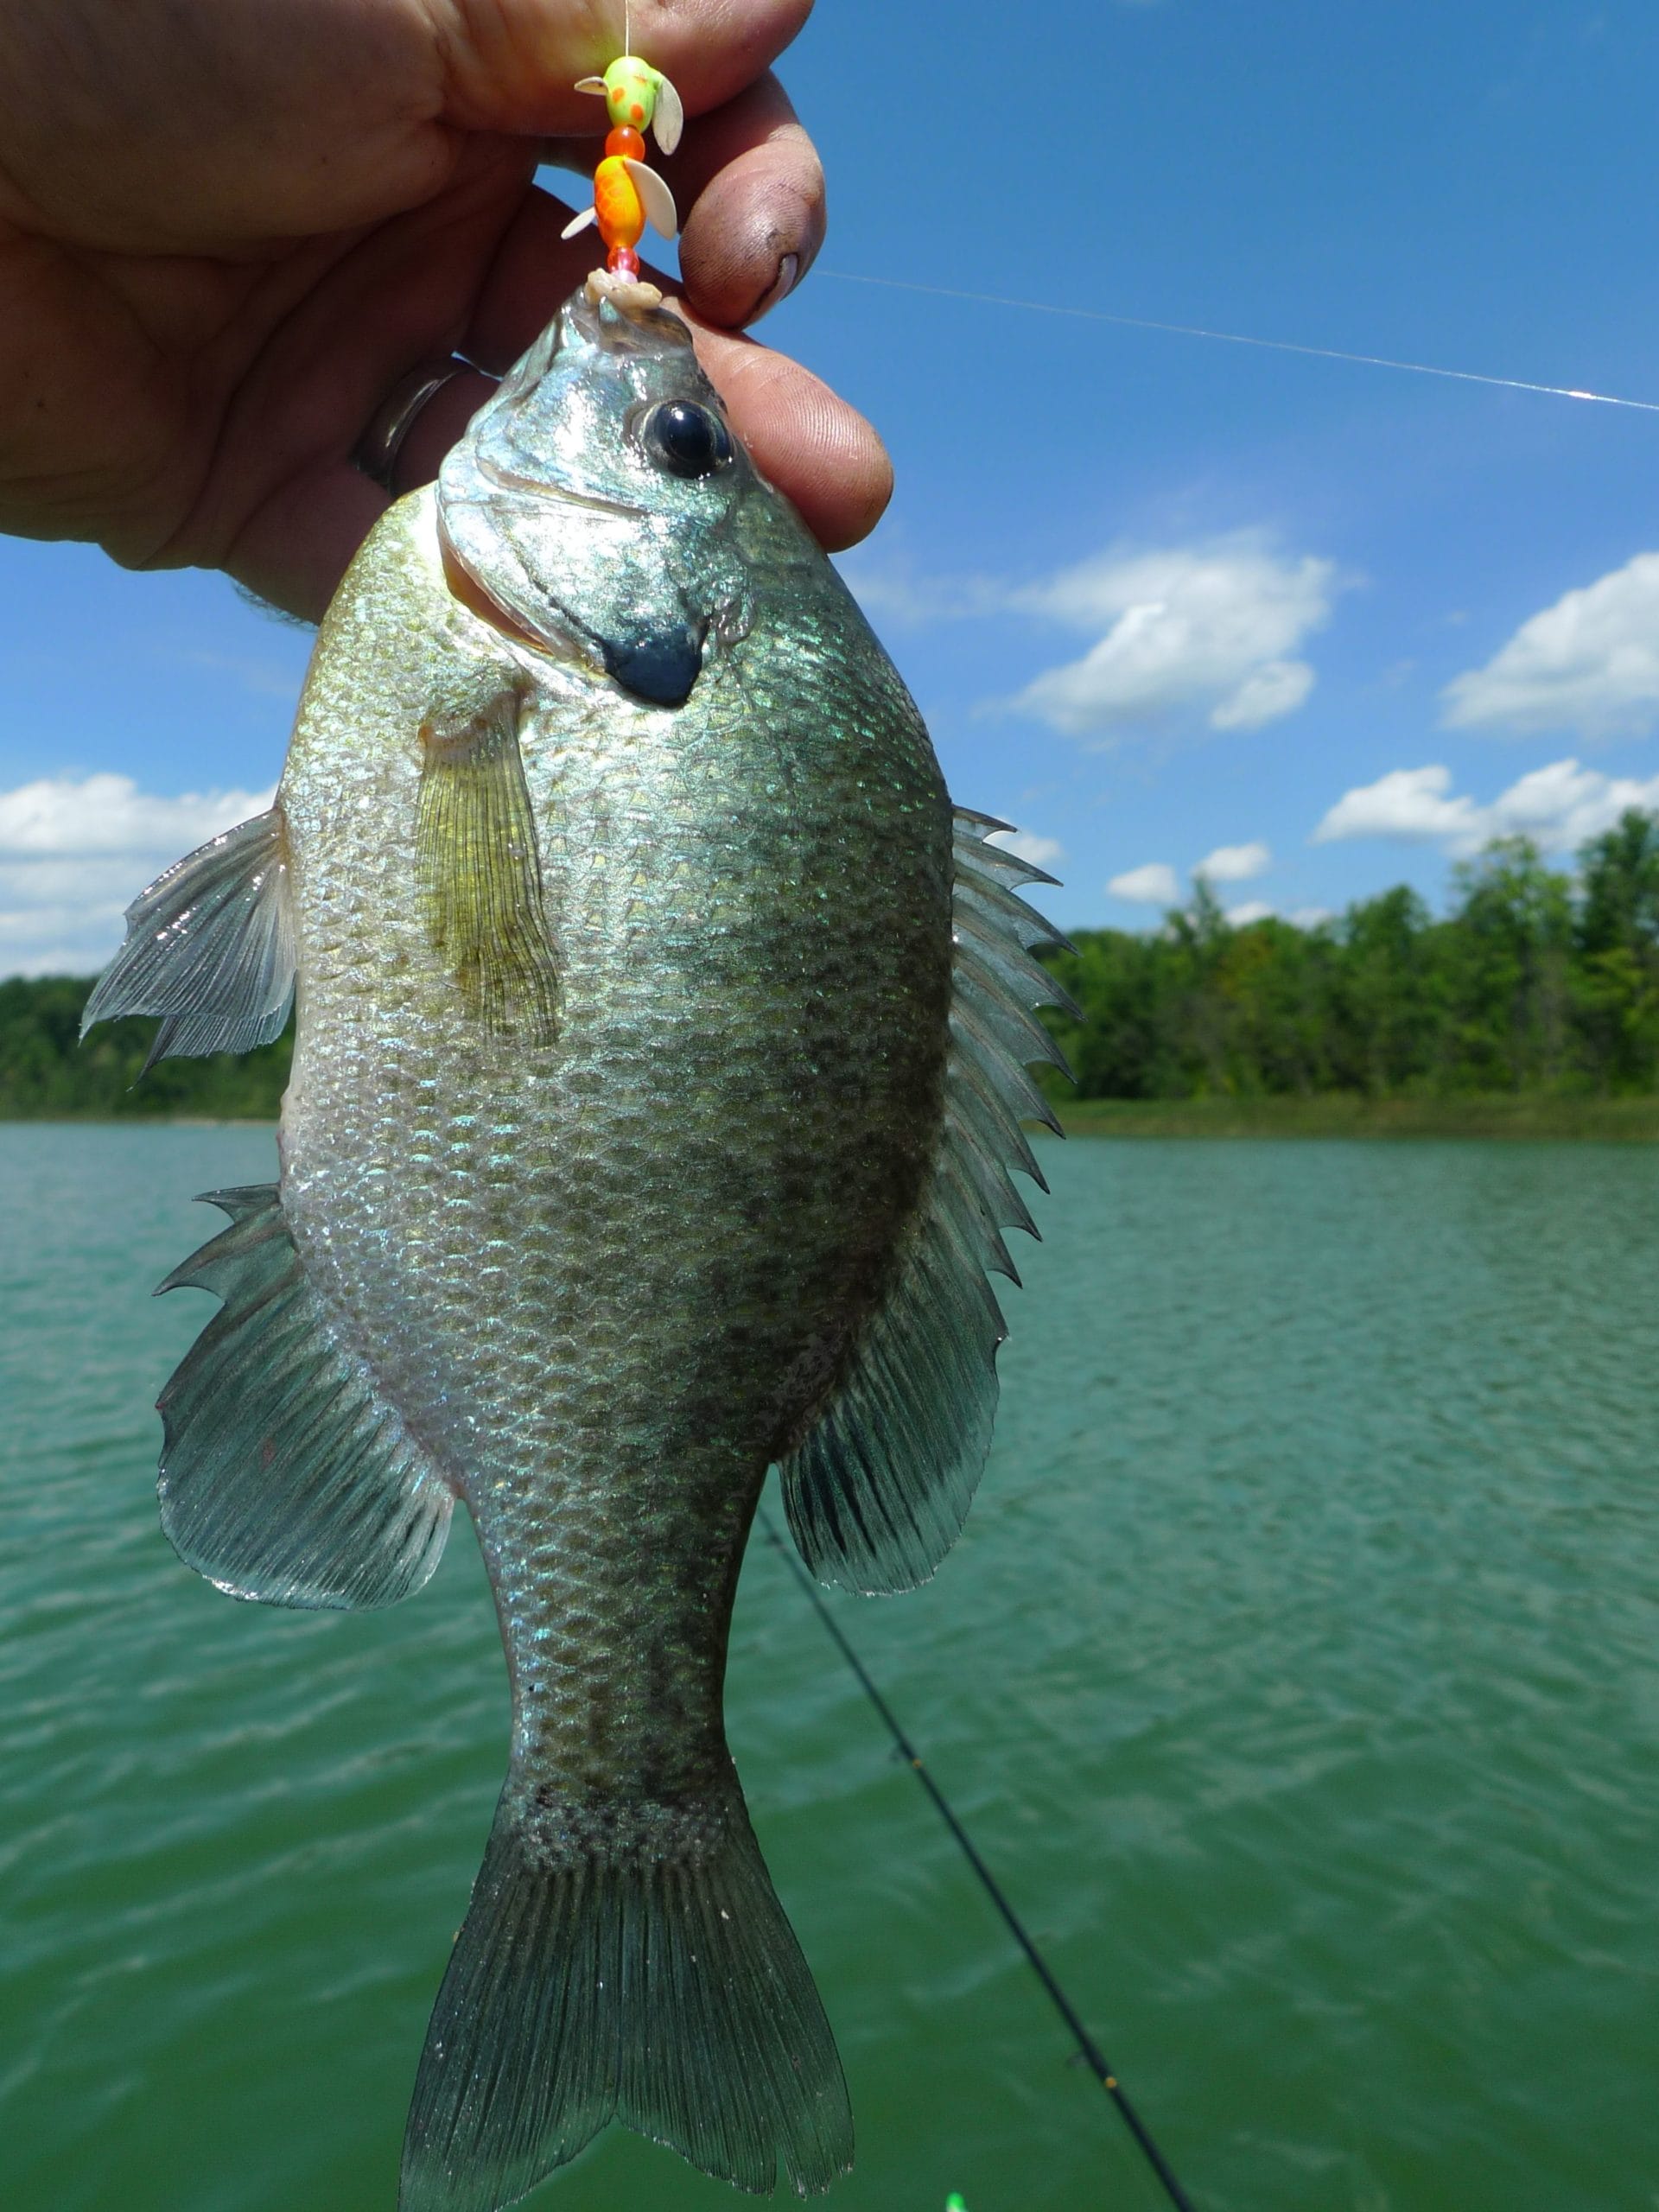 Two #14 Spin-N-Glos with bait can be deadly when trolling for bluegills.